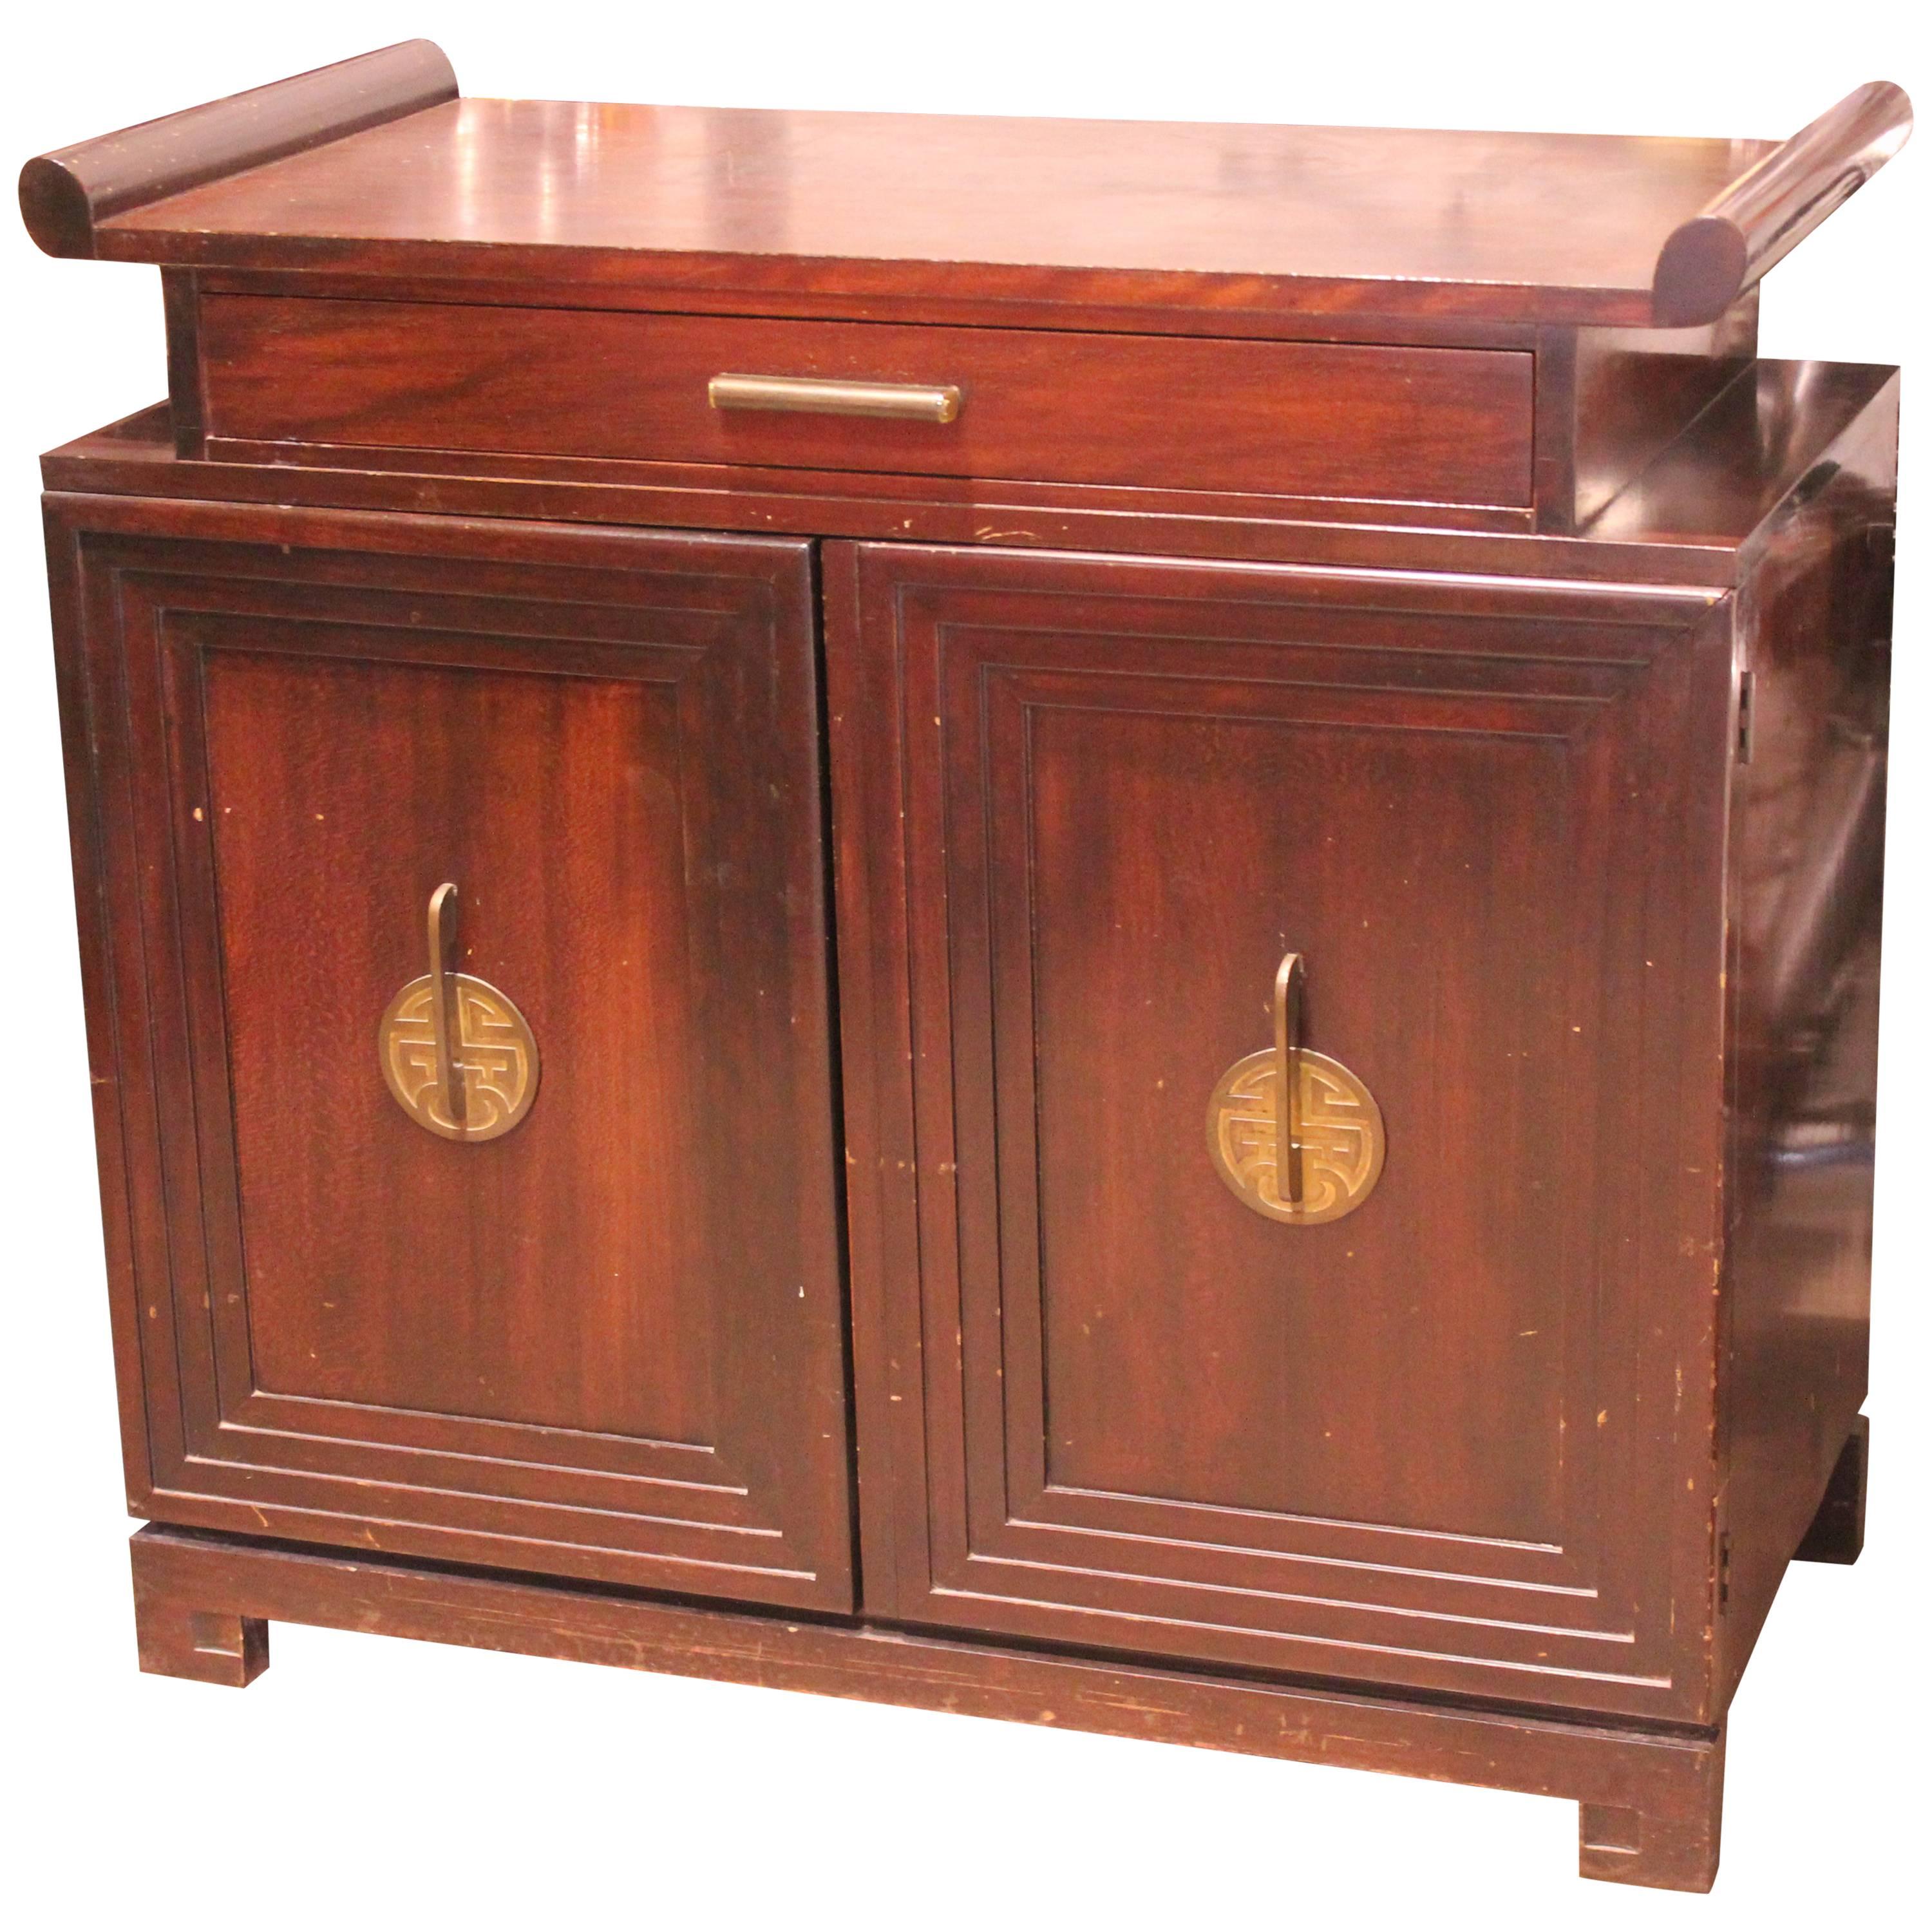 Modern Pagoda Style Chest of Drawers or Cabinet with Brass Hardware